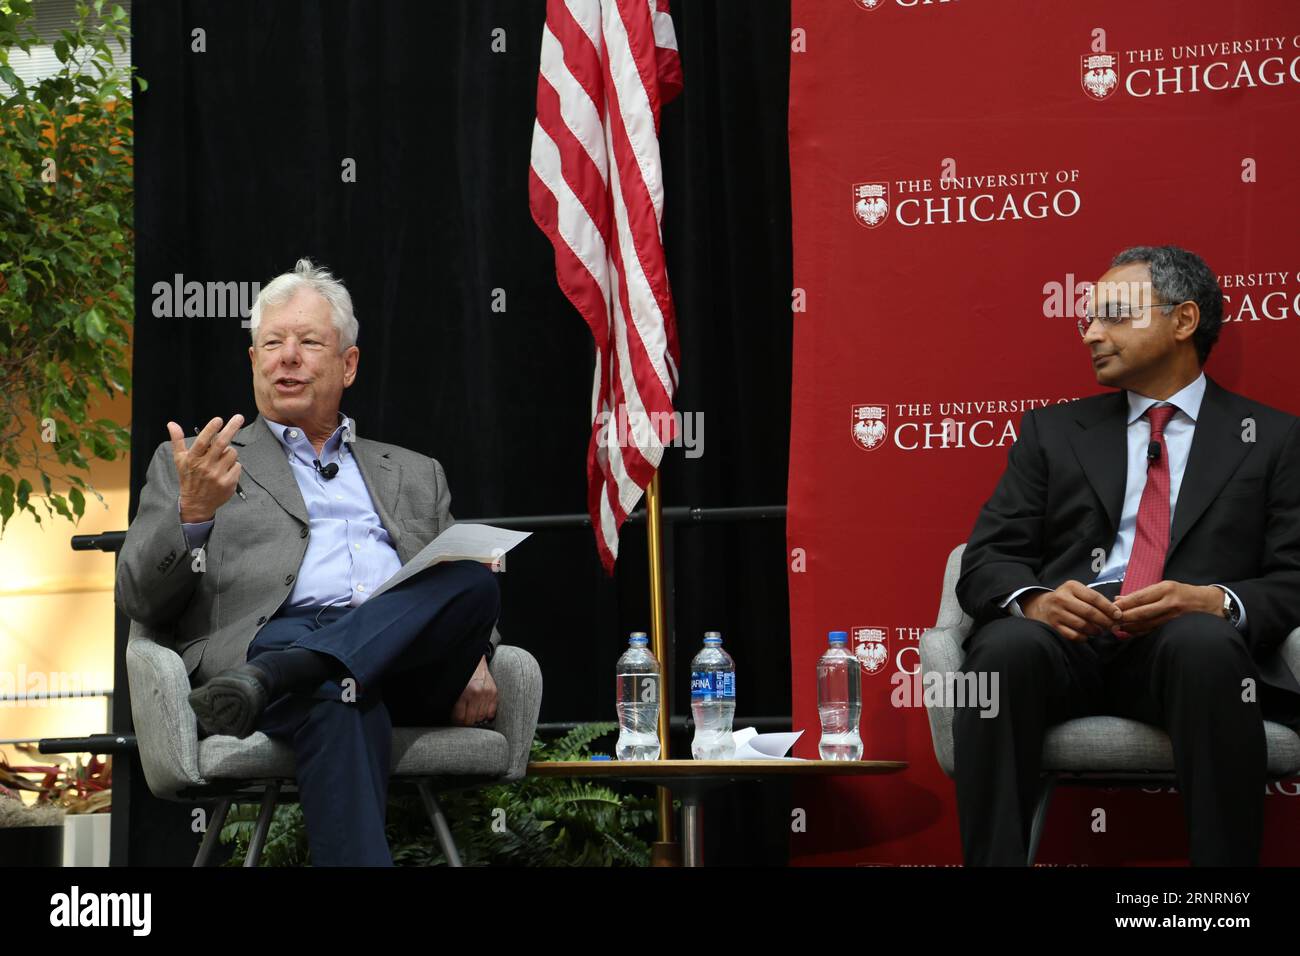 (171009) -- CHICAGO, Oct. 9, 2017 -- Richard H. Thaler (L), 2017 Nobel Prize winner in Economics, speaks during a press conference at University of Chicago Booth School of Business in Chicago, the United States, on Oct. 9, 2017. The 2017 Nobel Prize in Economics was awarded to Richard H. Thaler for his contributions to behavioural economics, announced the Royal Swedish Academy of Sciences on Monday. ) U.S.-CHICAGO-NOBEL PRIZE IN ECONOMICS-RICHARD H. THALER-PRESS CONFERENCE WangxQiang PUBLICATIONxNOTxINxCHN Stock Photo